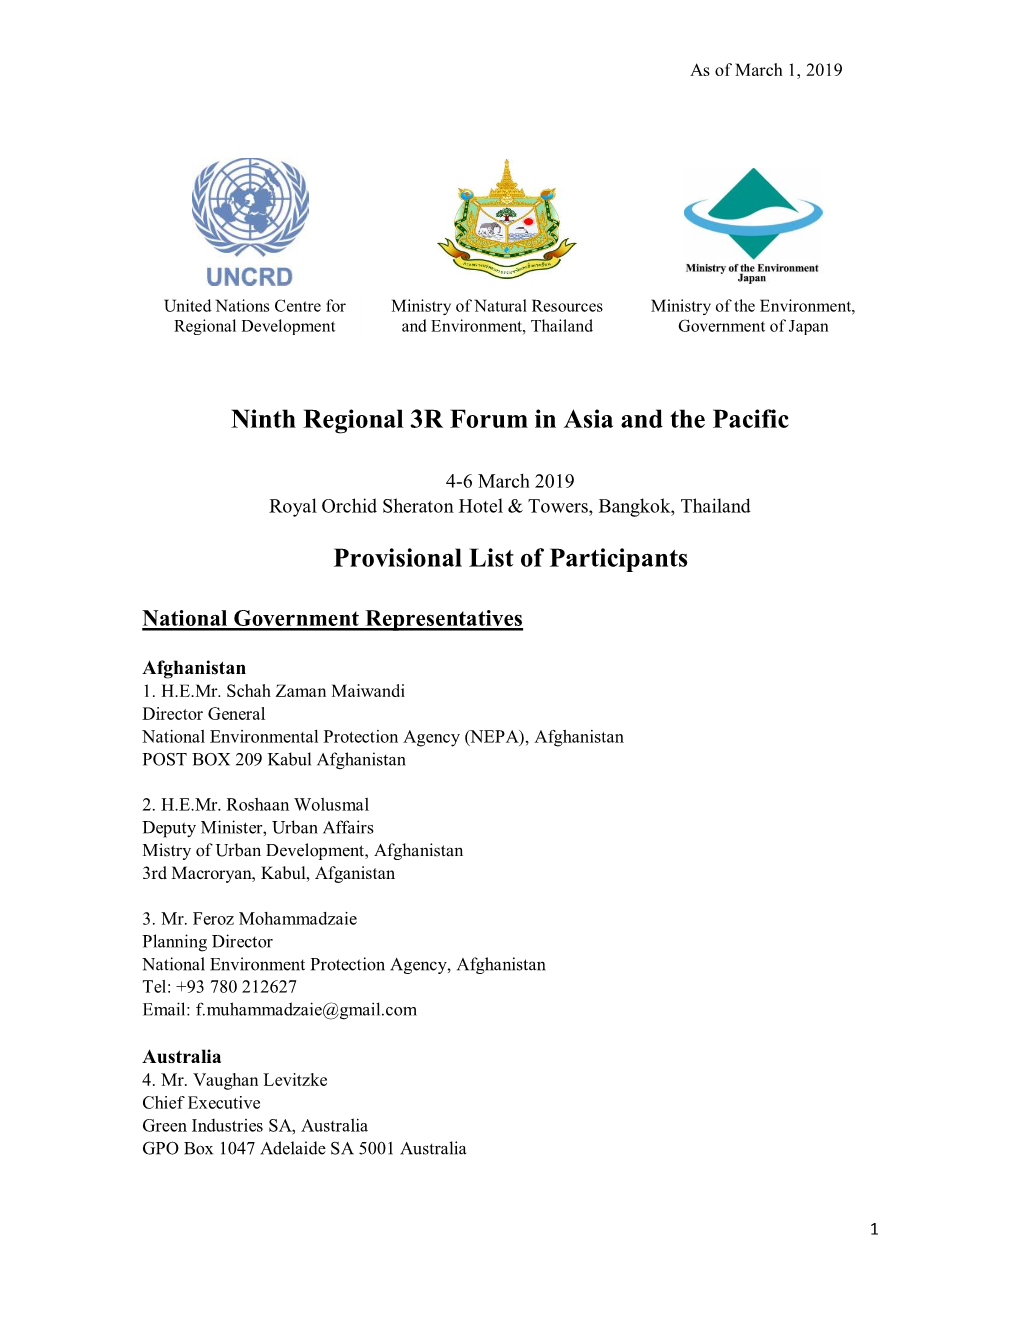 Ninth Regional 3R Forum in Asia and the Pacific Provisional List Of